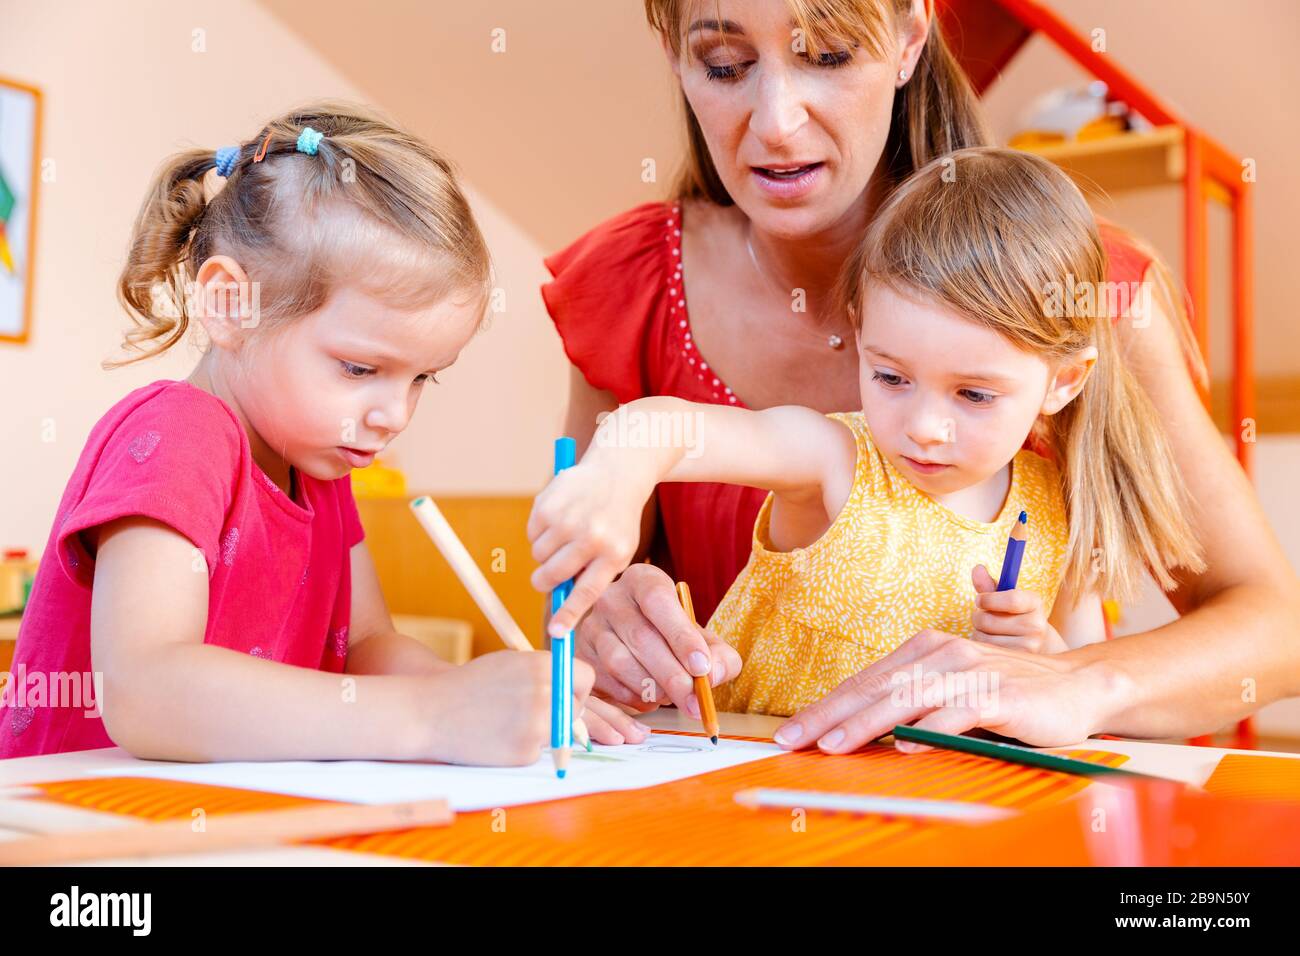 Children and play school teacher drawing together Stock Photo